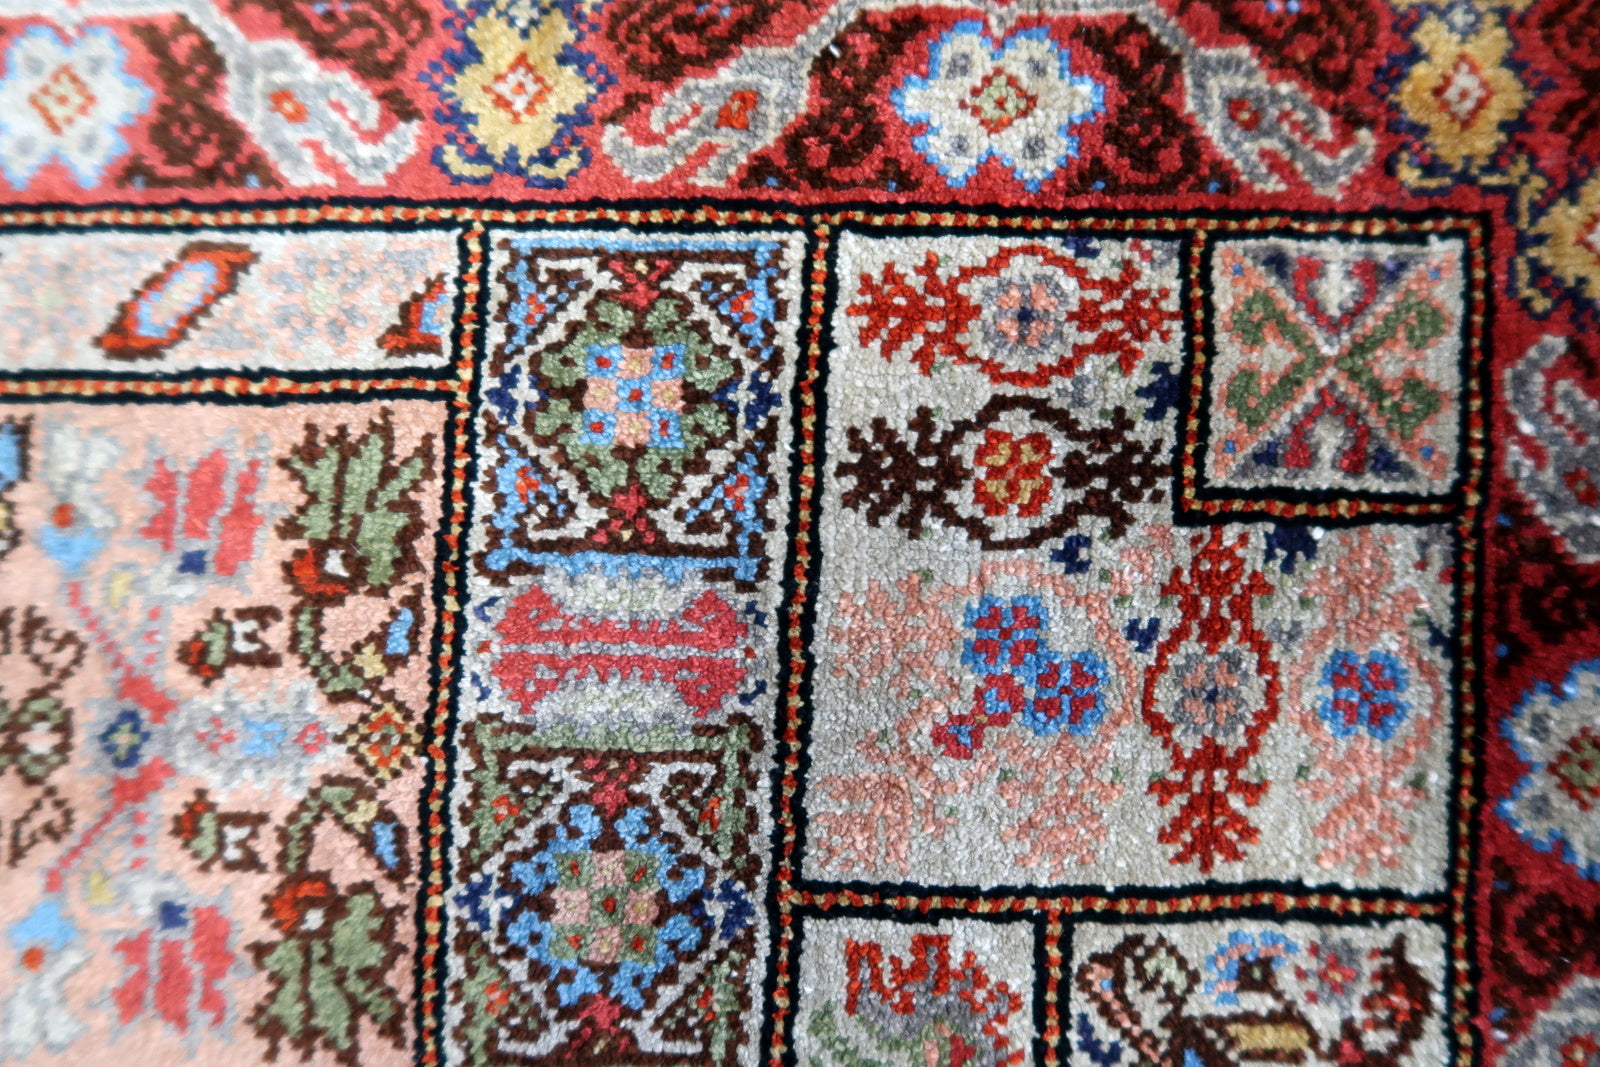 Close-up of the subtle touches of blue and cream accents on the rug's surface